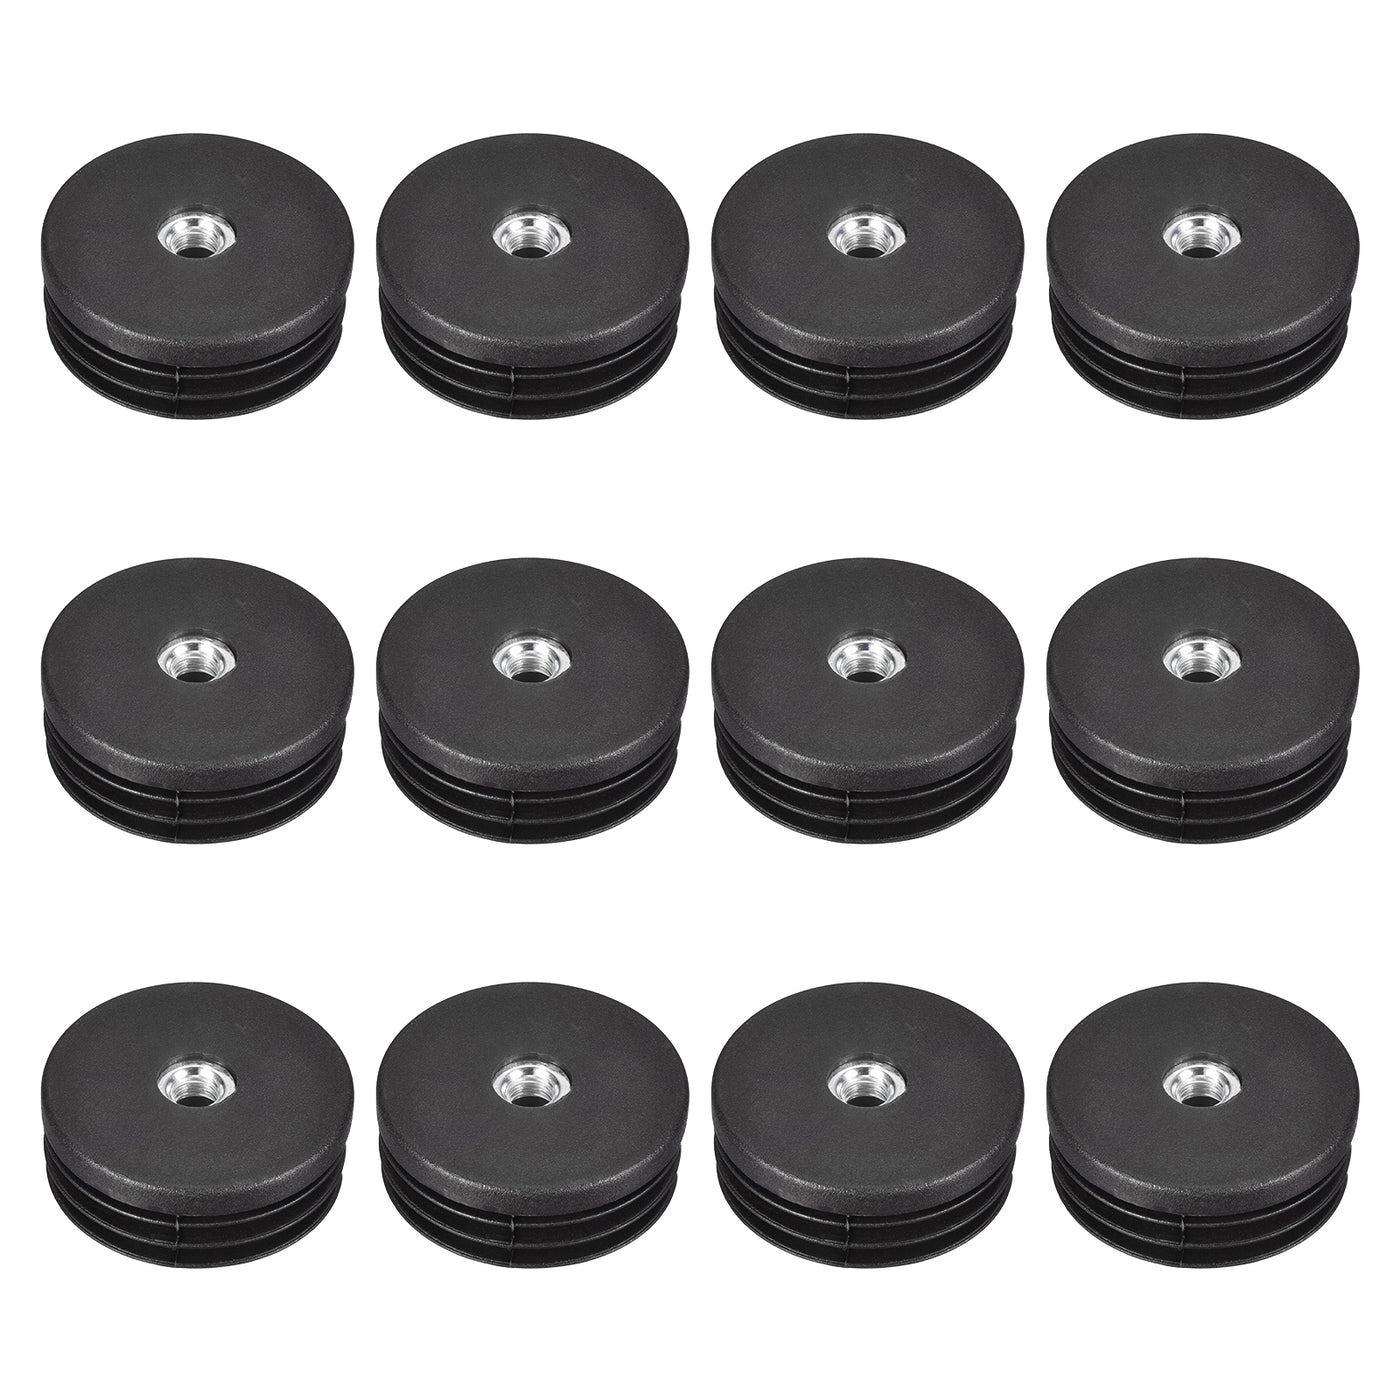 uxcell Uxcell 12Pcs 50mm/1.97" Caster Insert with Thread, Round M8 Thread for Furniture